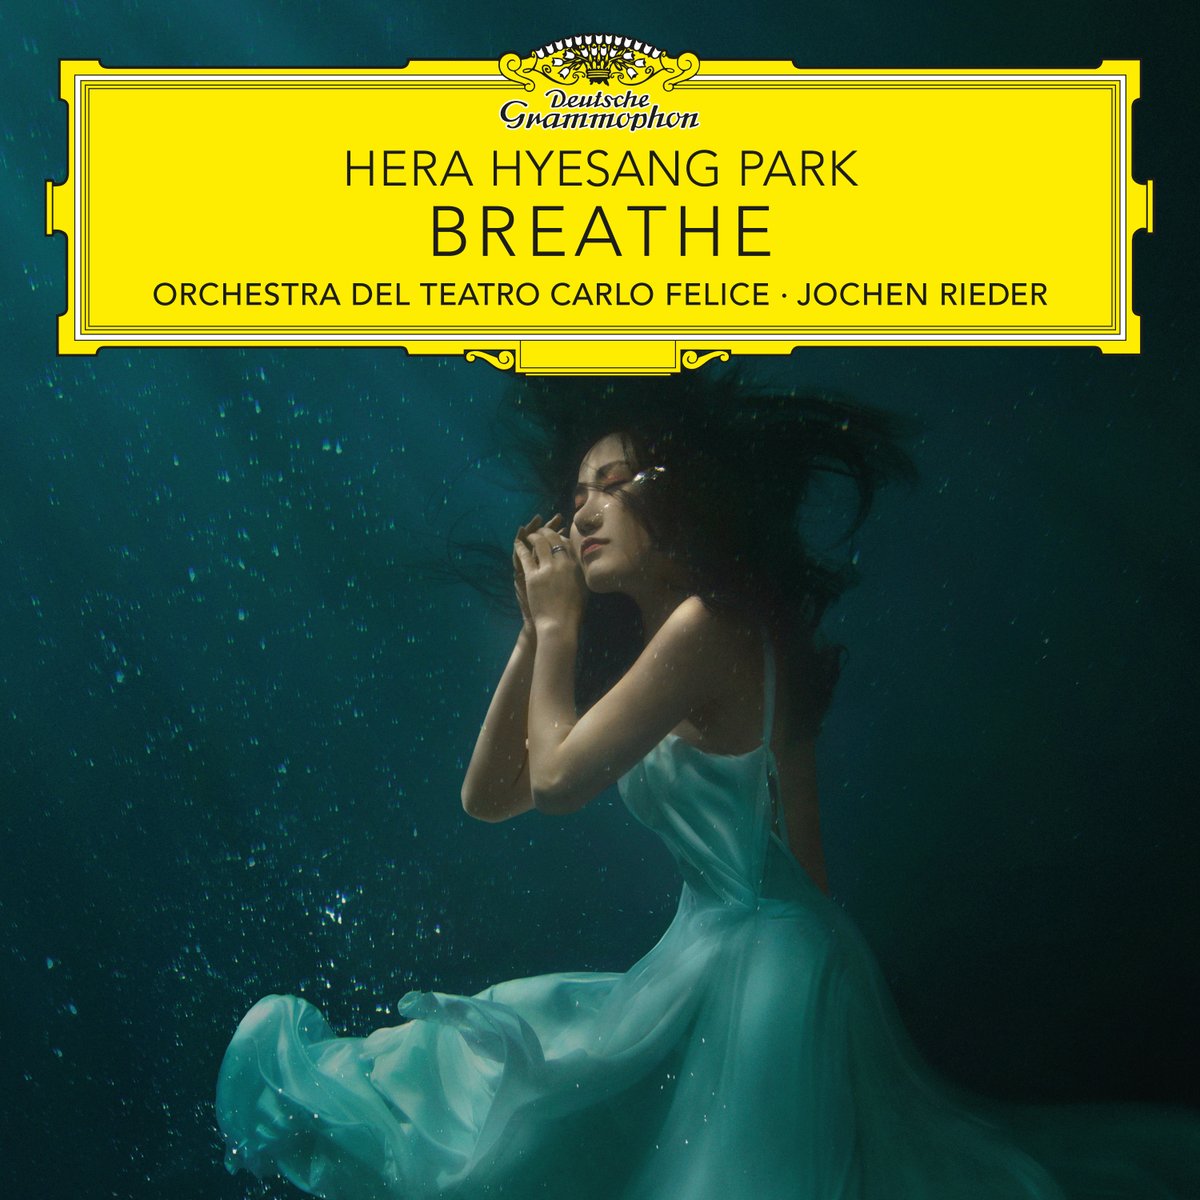 🤩 We are excited to present @herahyesangpark's new album! Breathe features operatic favourites by Delibes, Massenet, Orff, Rossini and Verdi, as well as contemporary works by @lukehowardmusic, @ceciliacomposer, Hyowon Woo and @BernatVivancos. 💿 → dgt.link/HyesangPark-Br…